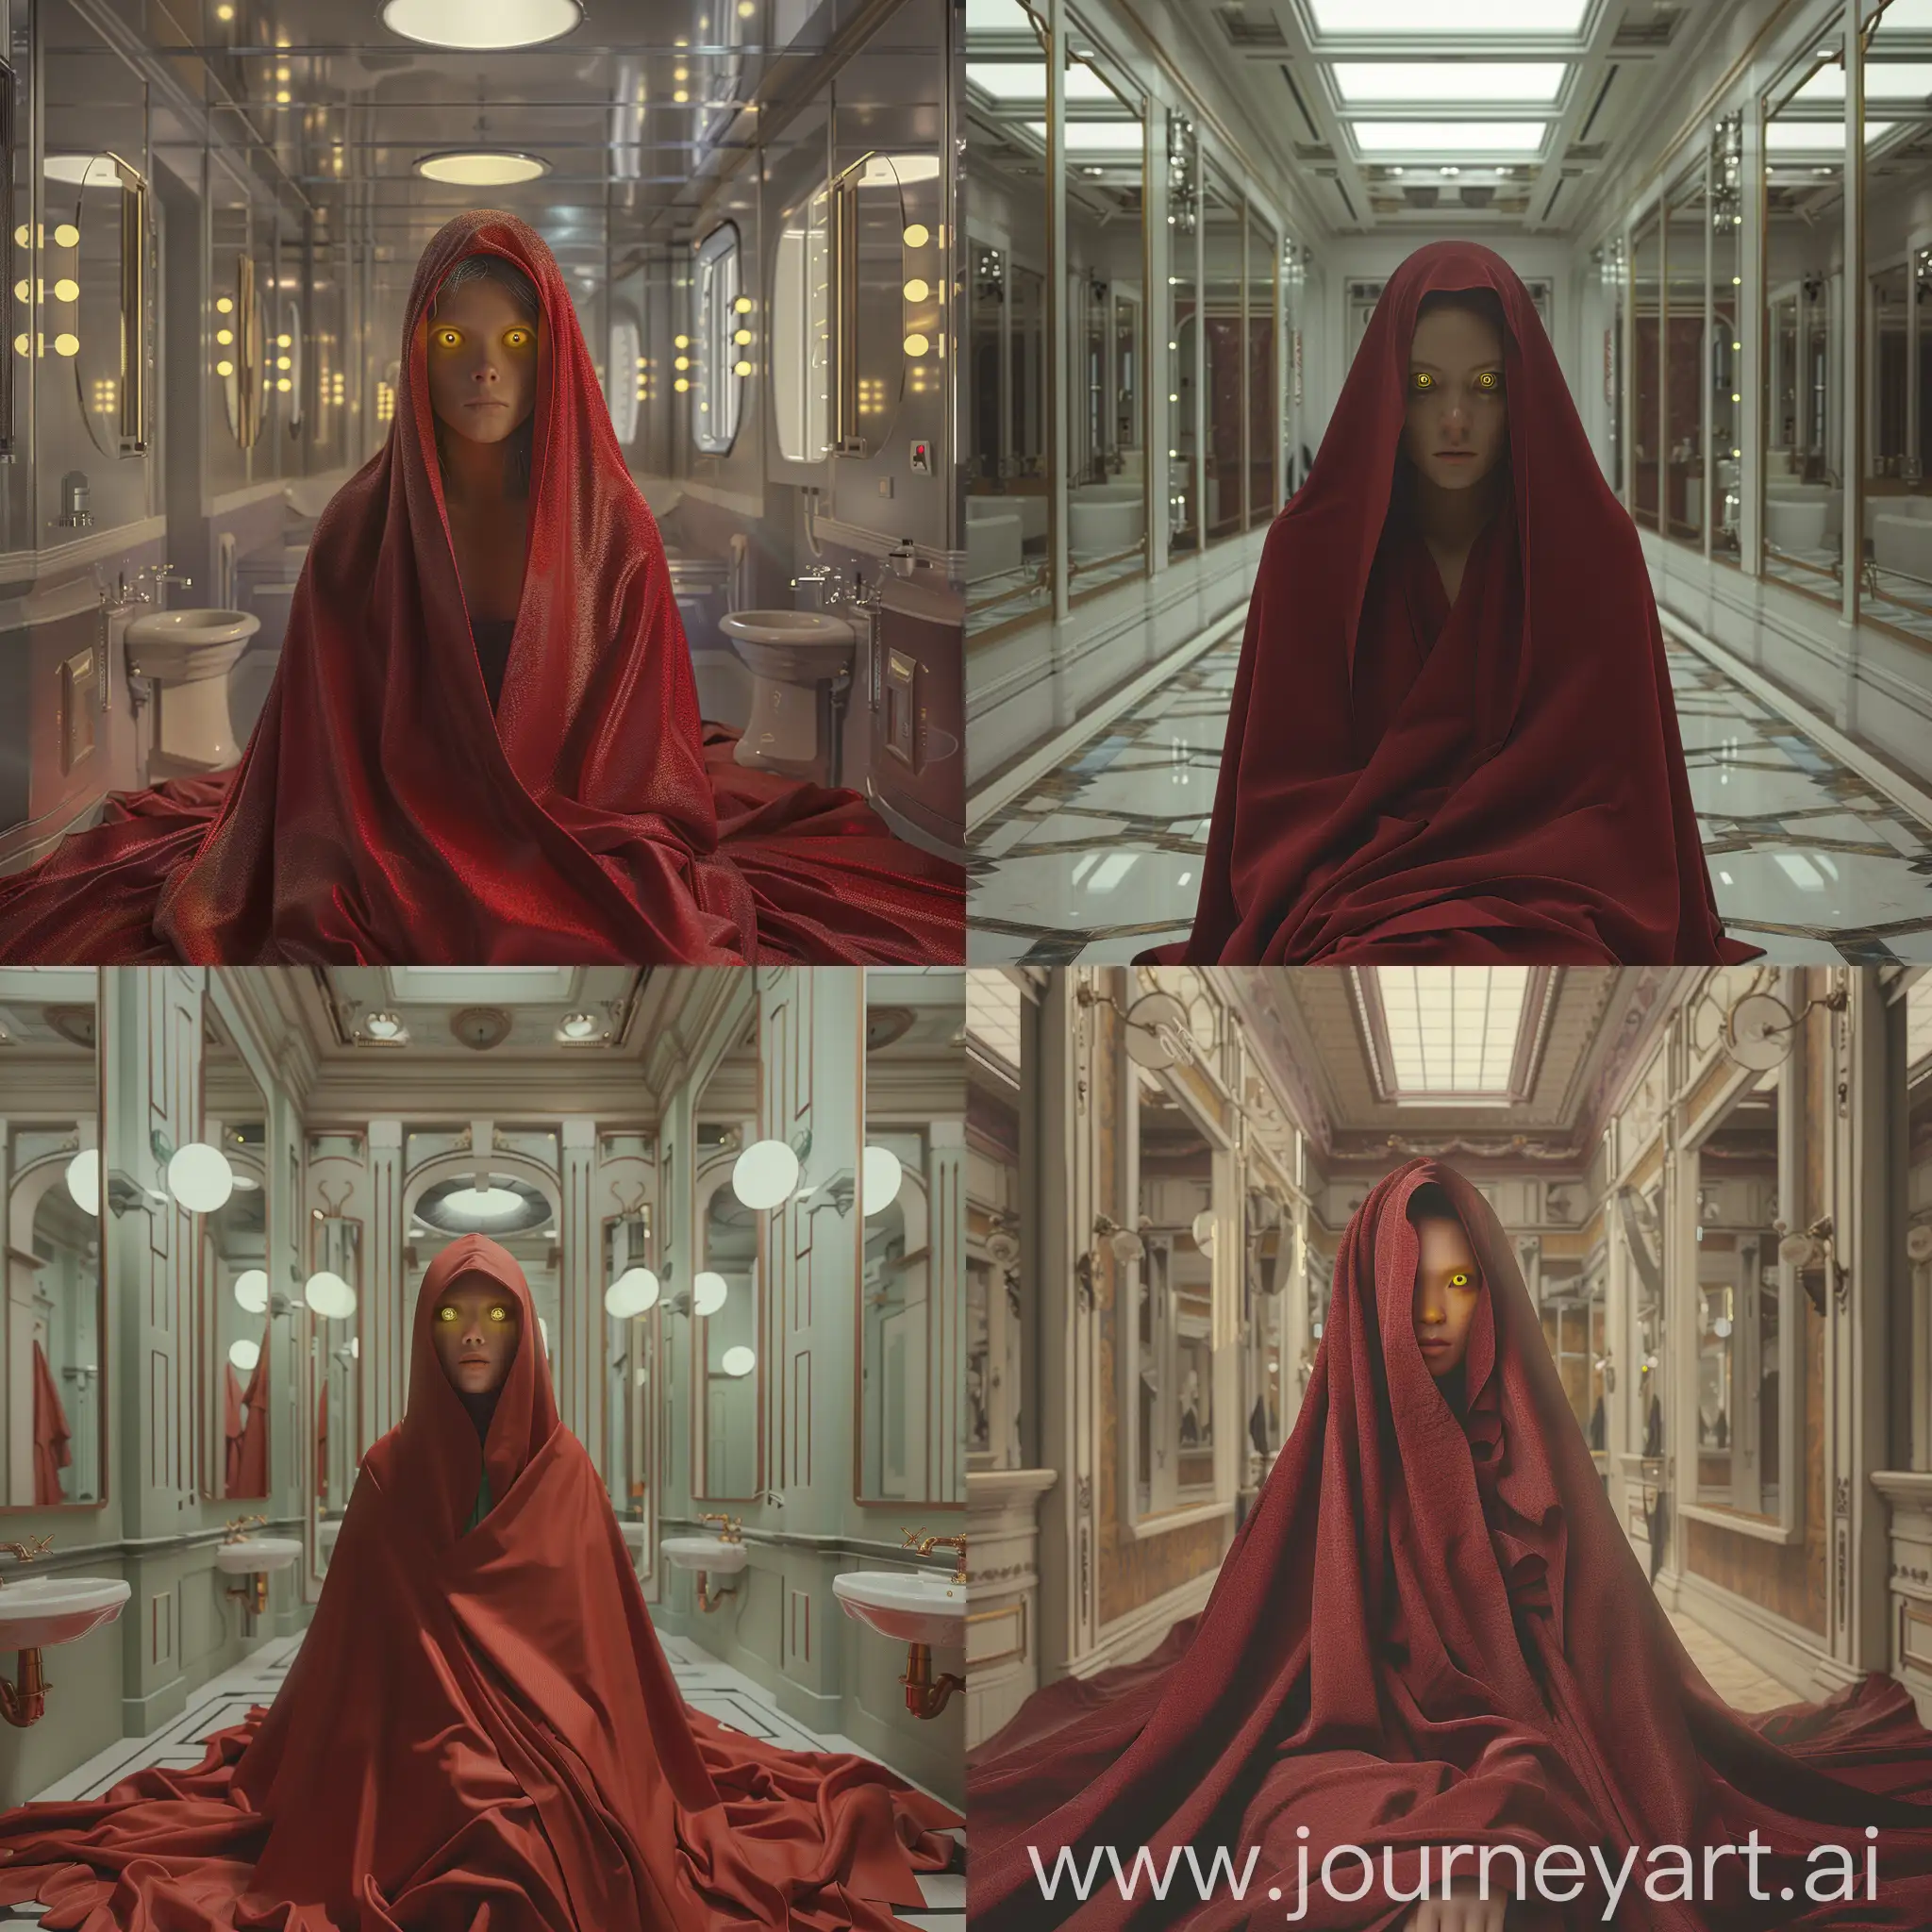 Mysterious-Woman-in-Red-Cloak-Amidst-Mirrored-Ambiance